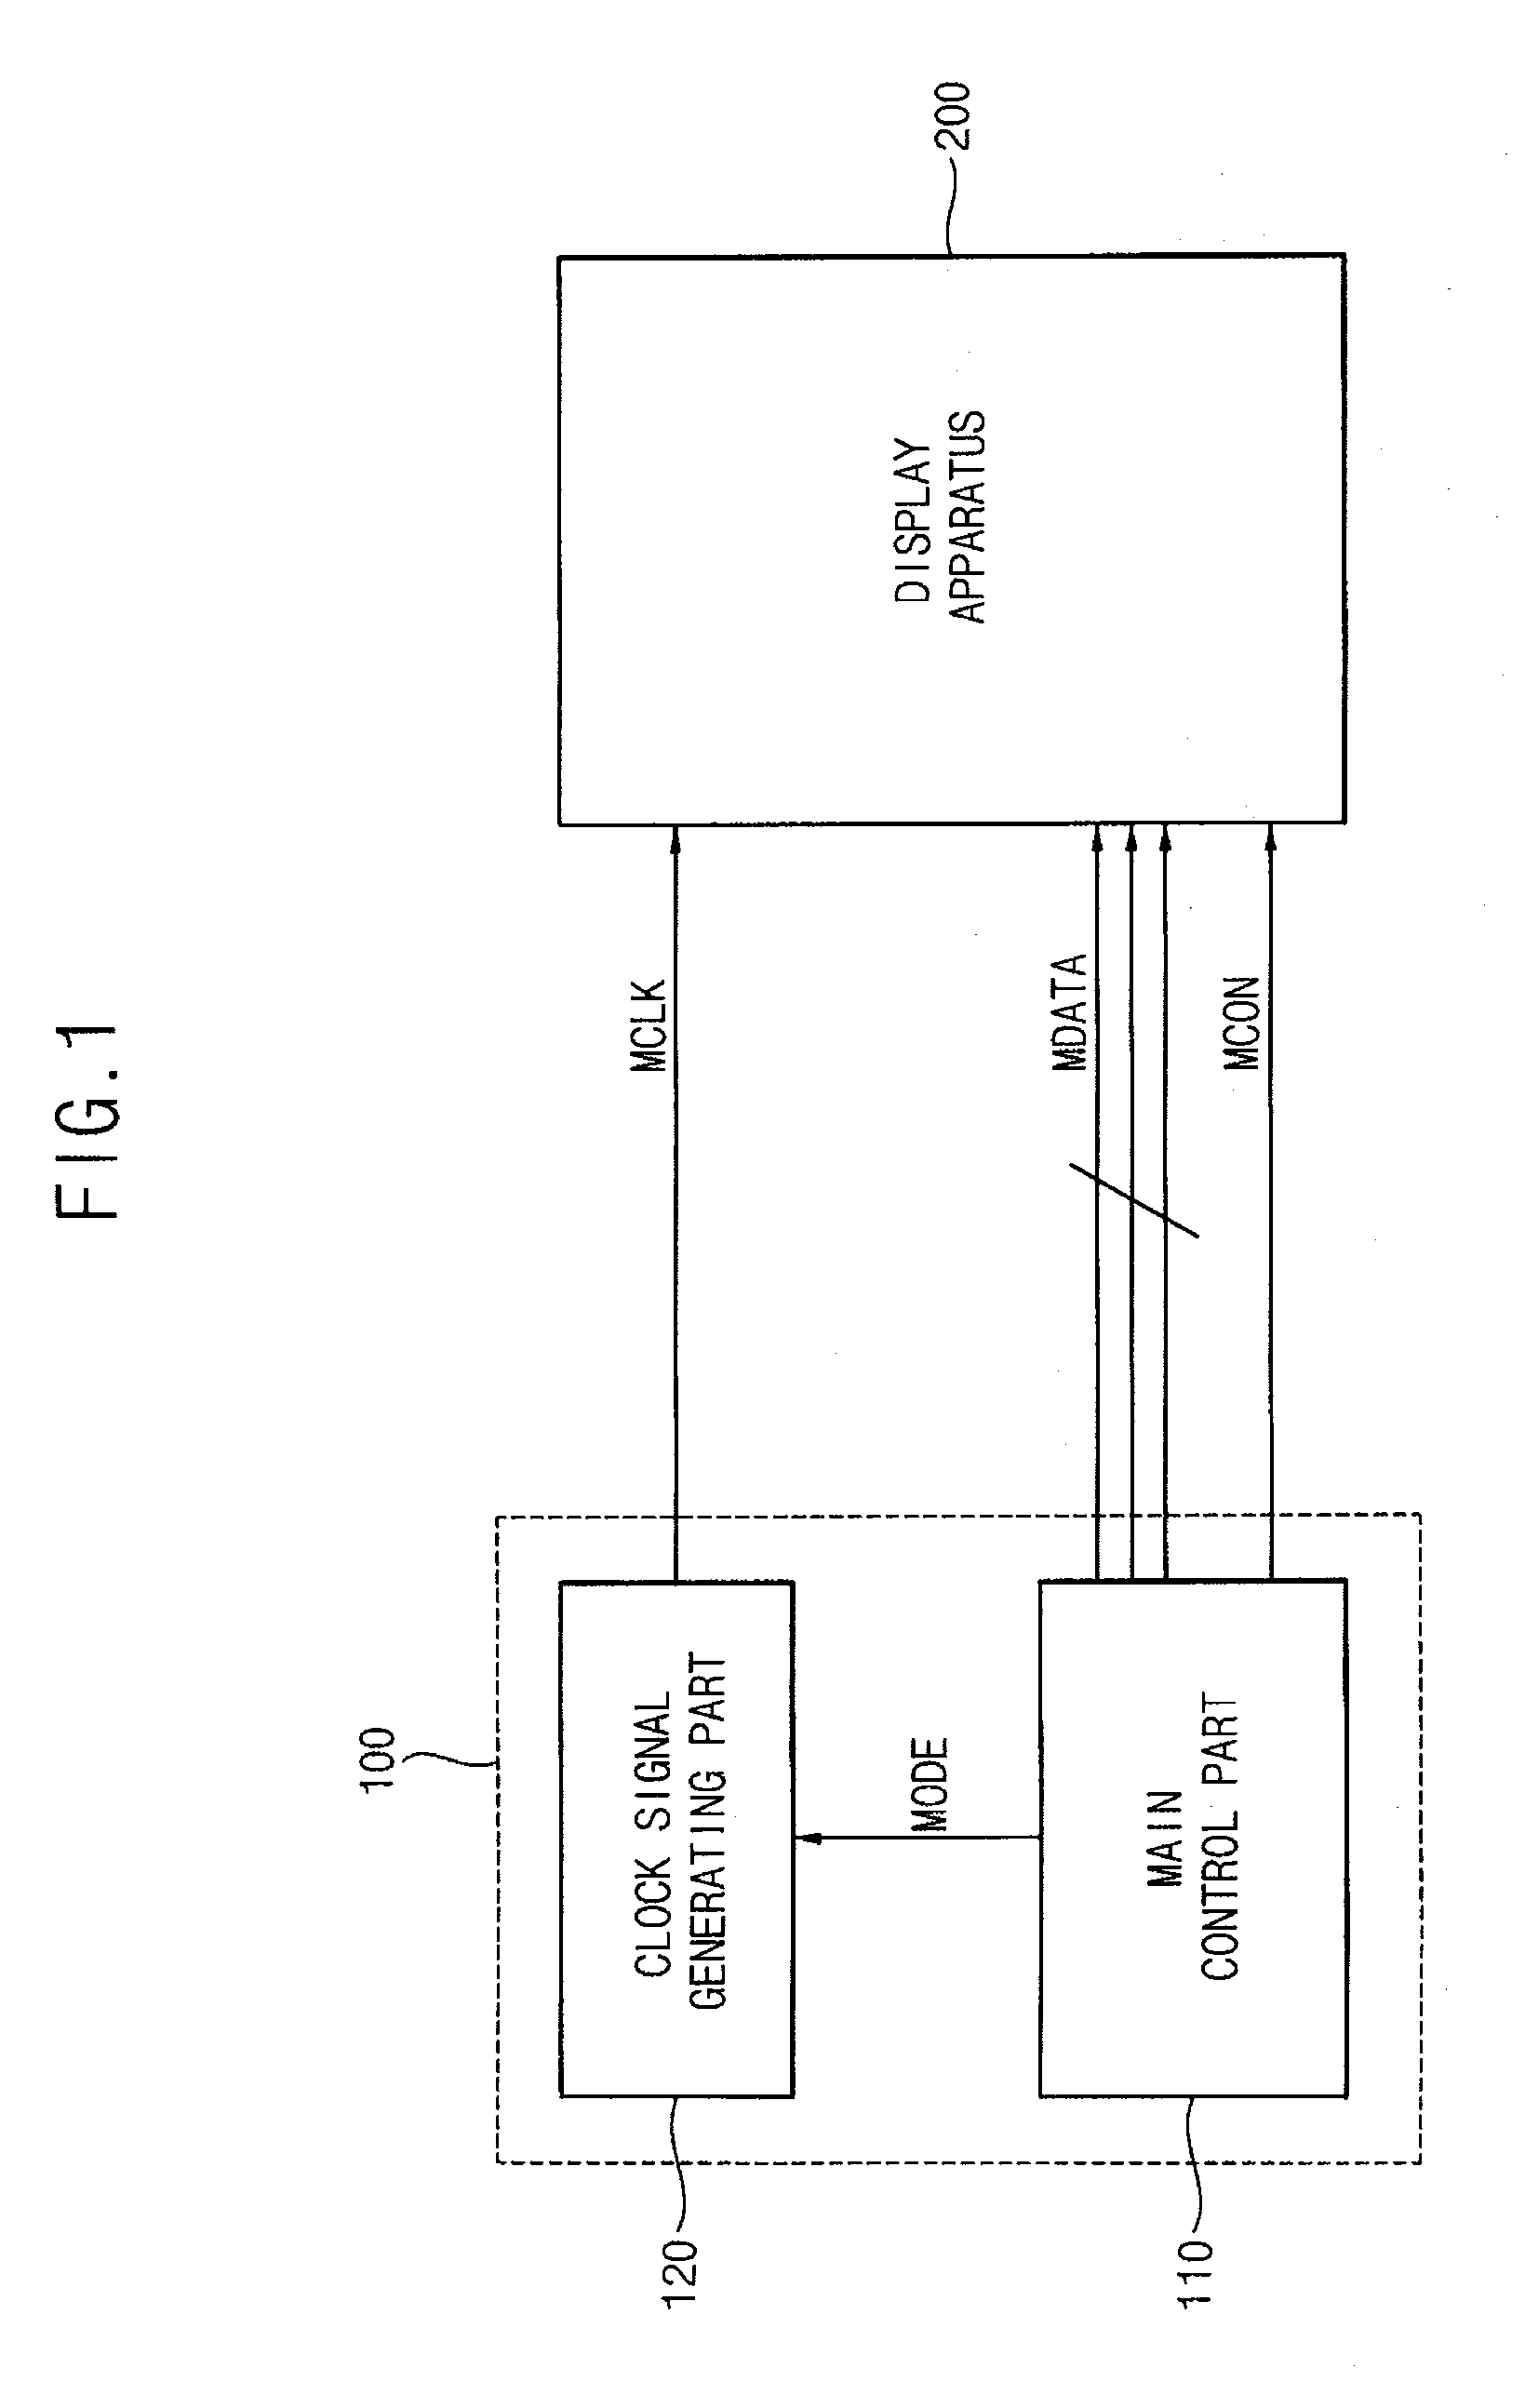 Display system and method for driving the same